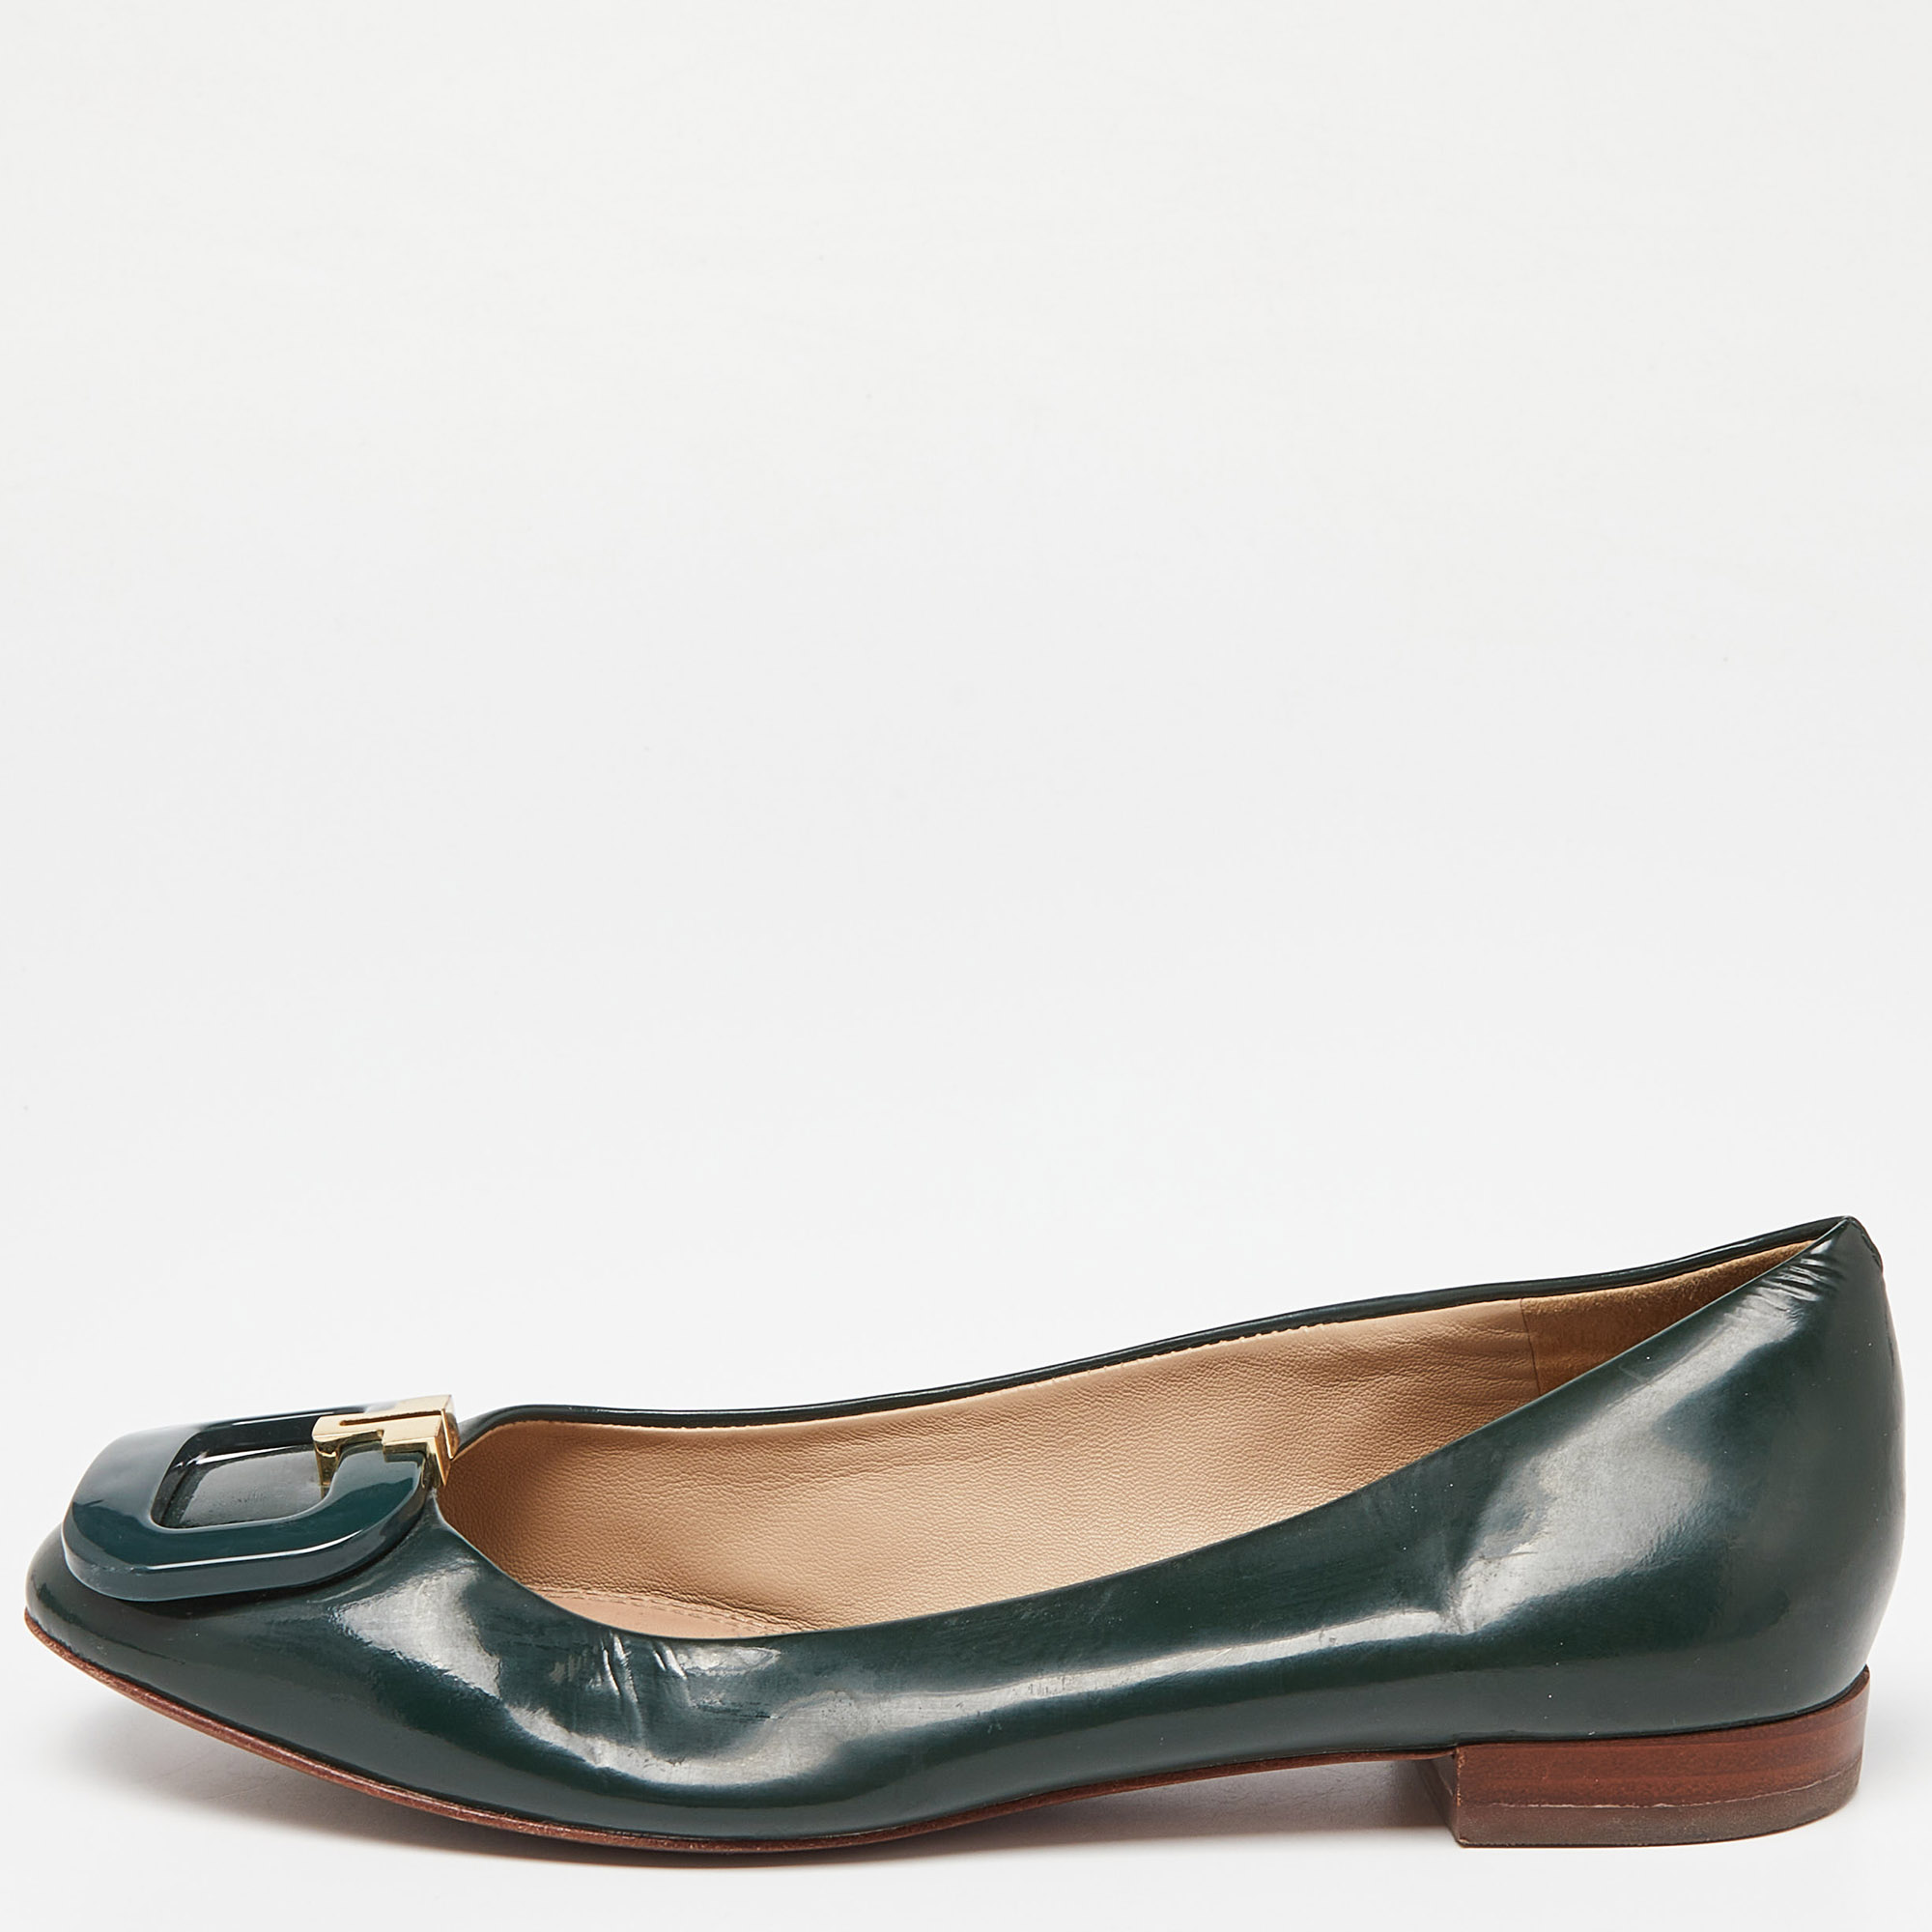 Tory Burch Green Patent Leather Ballet Flats Size 37